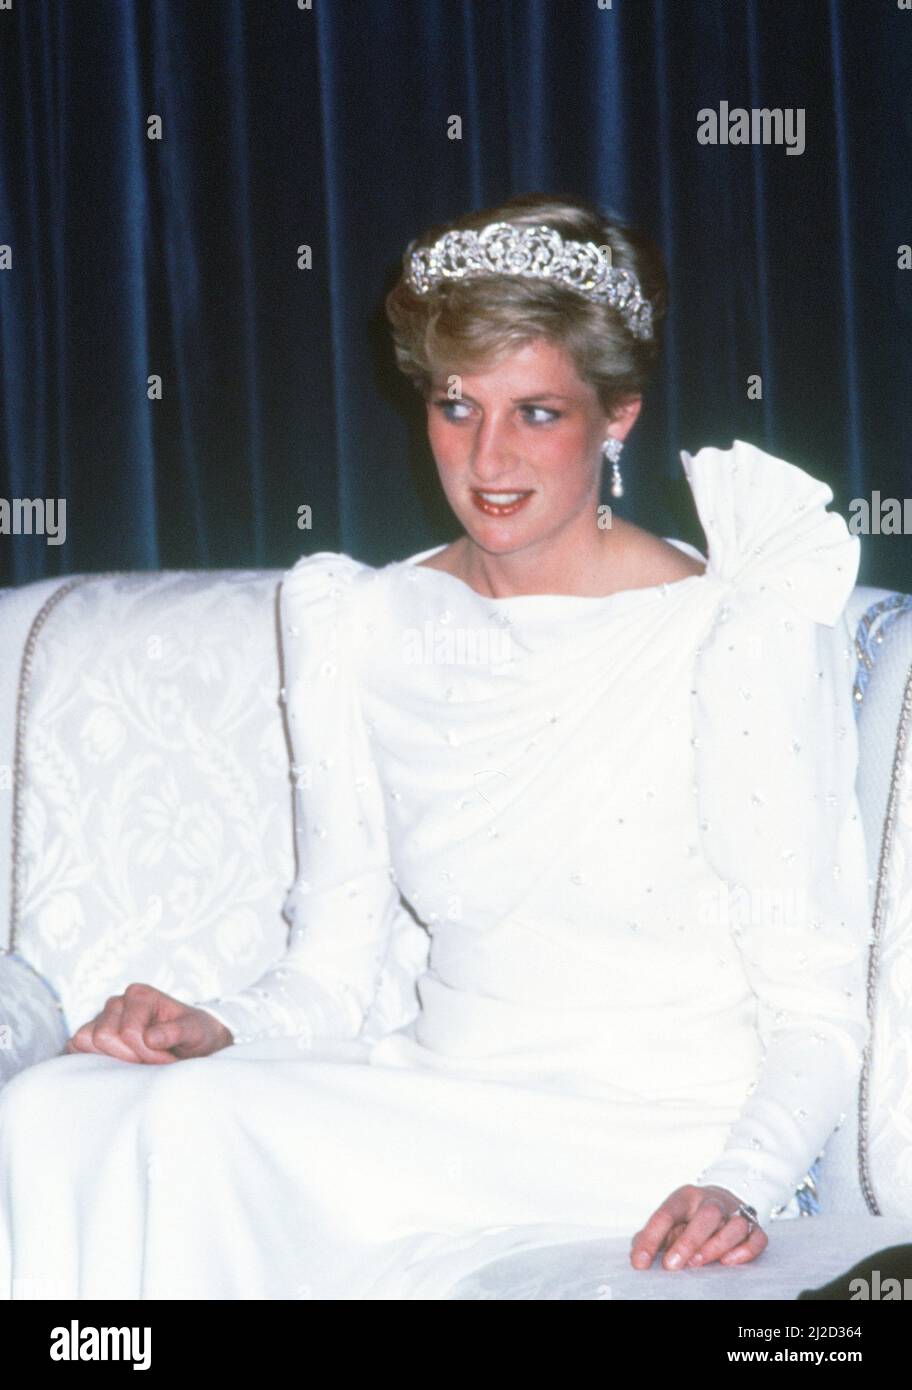 Prince and Princess of Wales, Middle East Tour November 1986. Our Picture Shows ... Princess Diana attends State Banquet, Bahrain, Sunday 16th November 1986.  Wearing outfit designed by Elizabeth and David Emanuel, hand embroidered with a million tiny crystals and diamante beads.  Wearing Spencer family diamond tiara. Stock Photo